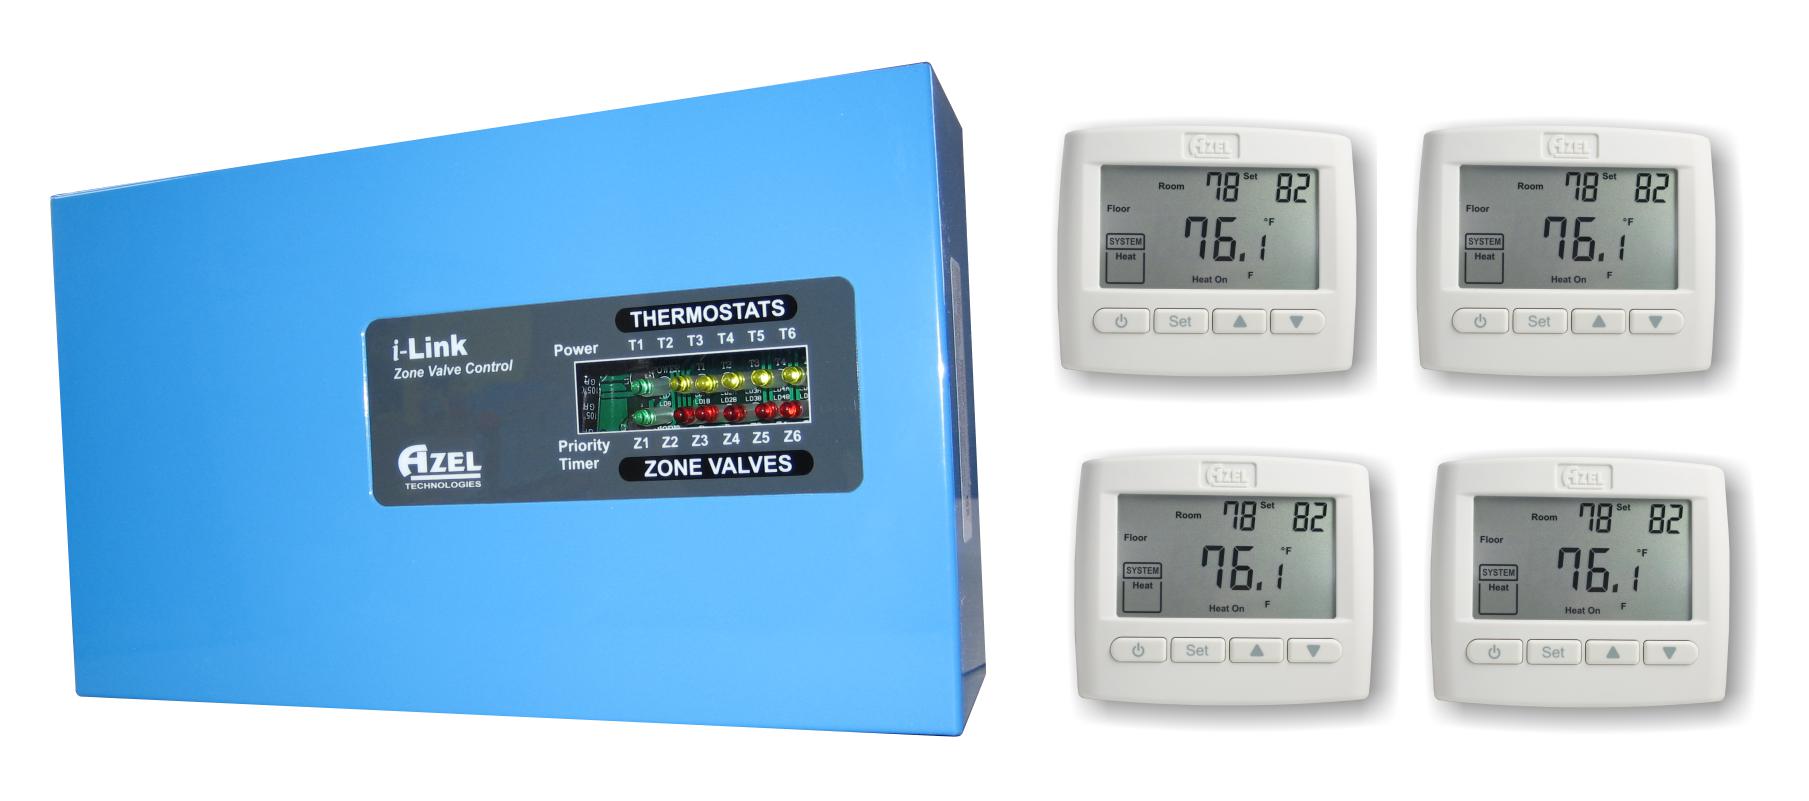 Package Deal: SZ-V4 with 4 units of D-508F Floor Heating Thermostats